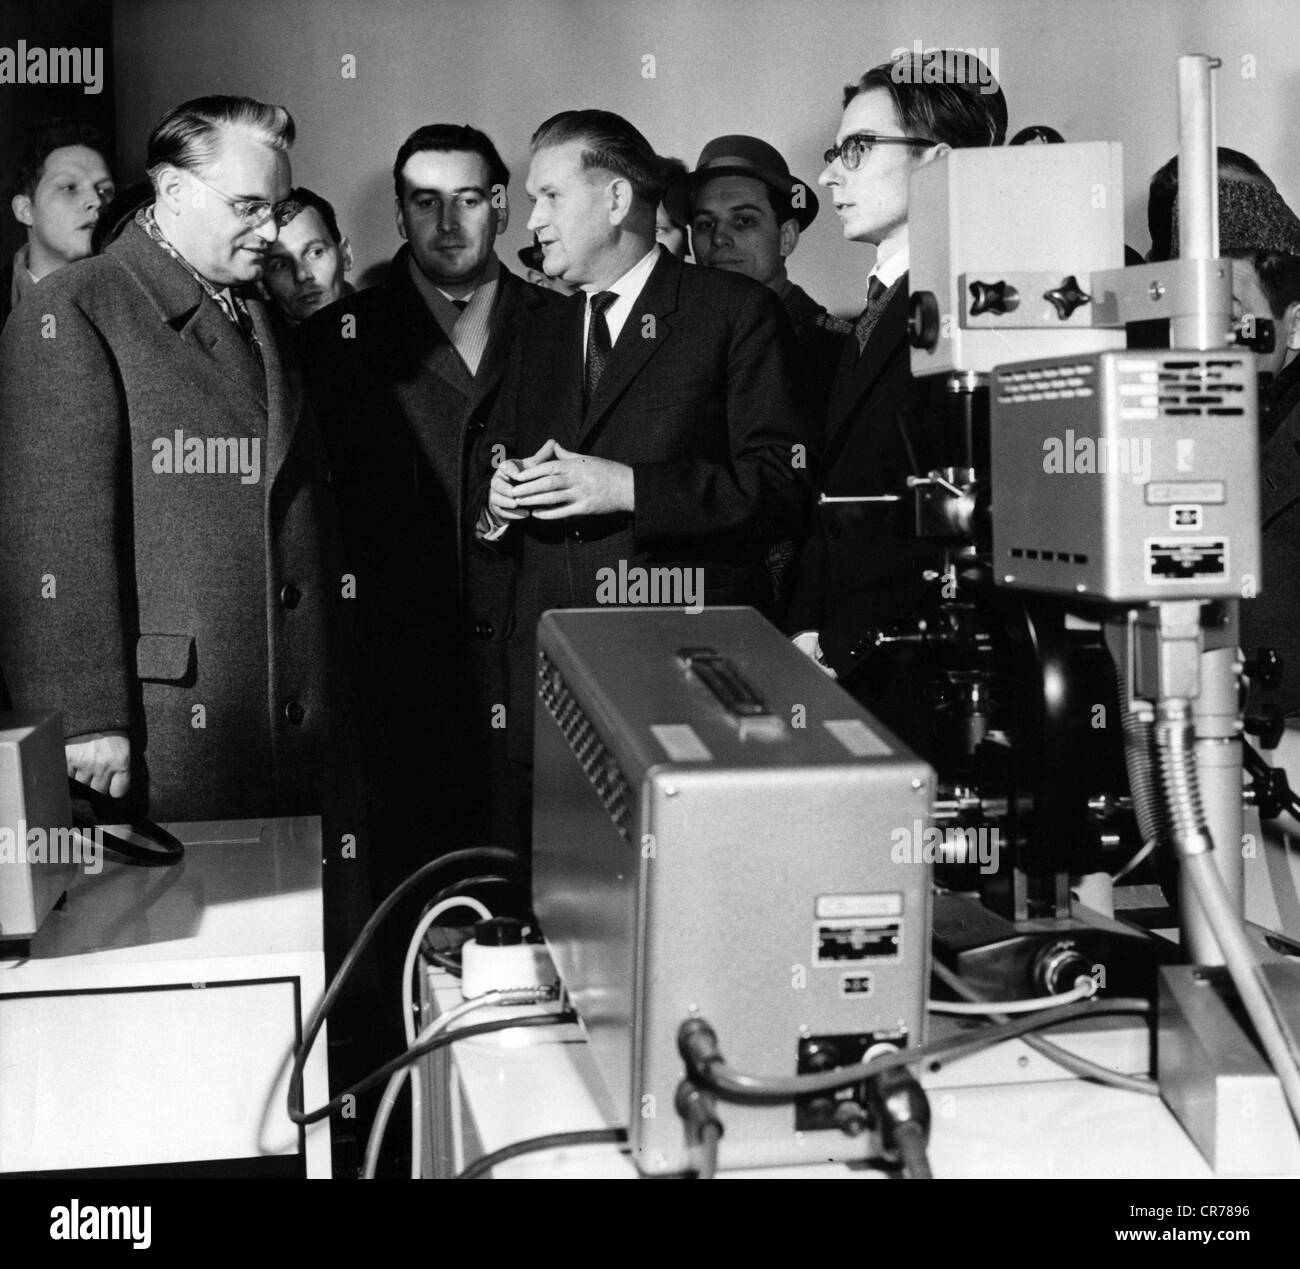 Goetting, Gerald, 9.6.1923 - 19.5.2015, German politician (CDU), Deputy Chairman of the East German Council of State 1960 - 1989, at the Leipzig Spring Fair, booth of Zeiss Jena, March 1964, Stock Photo